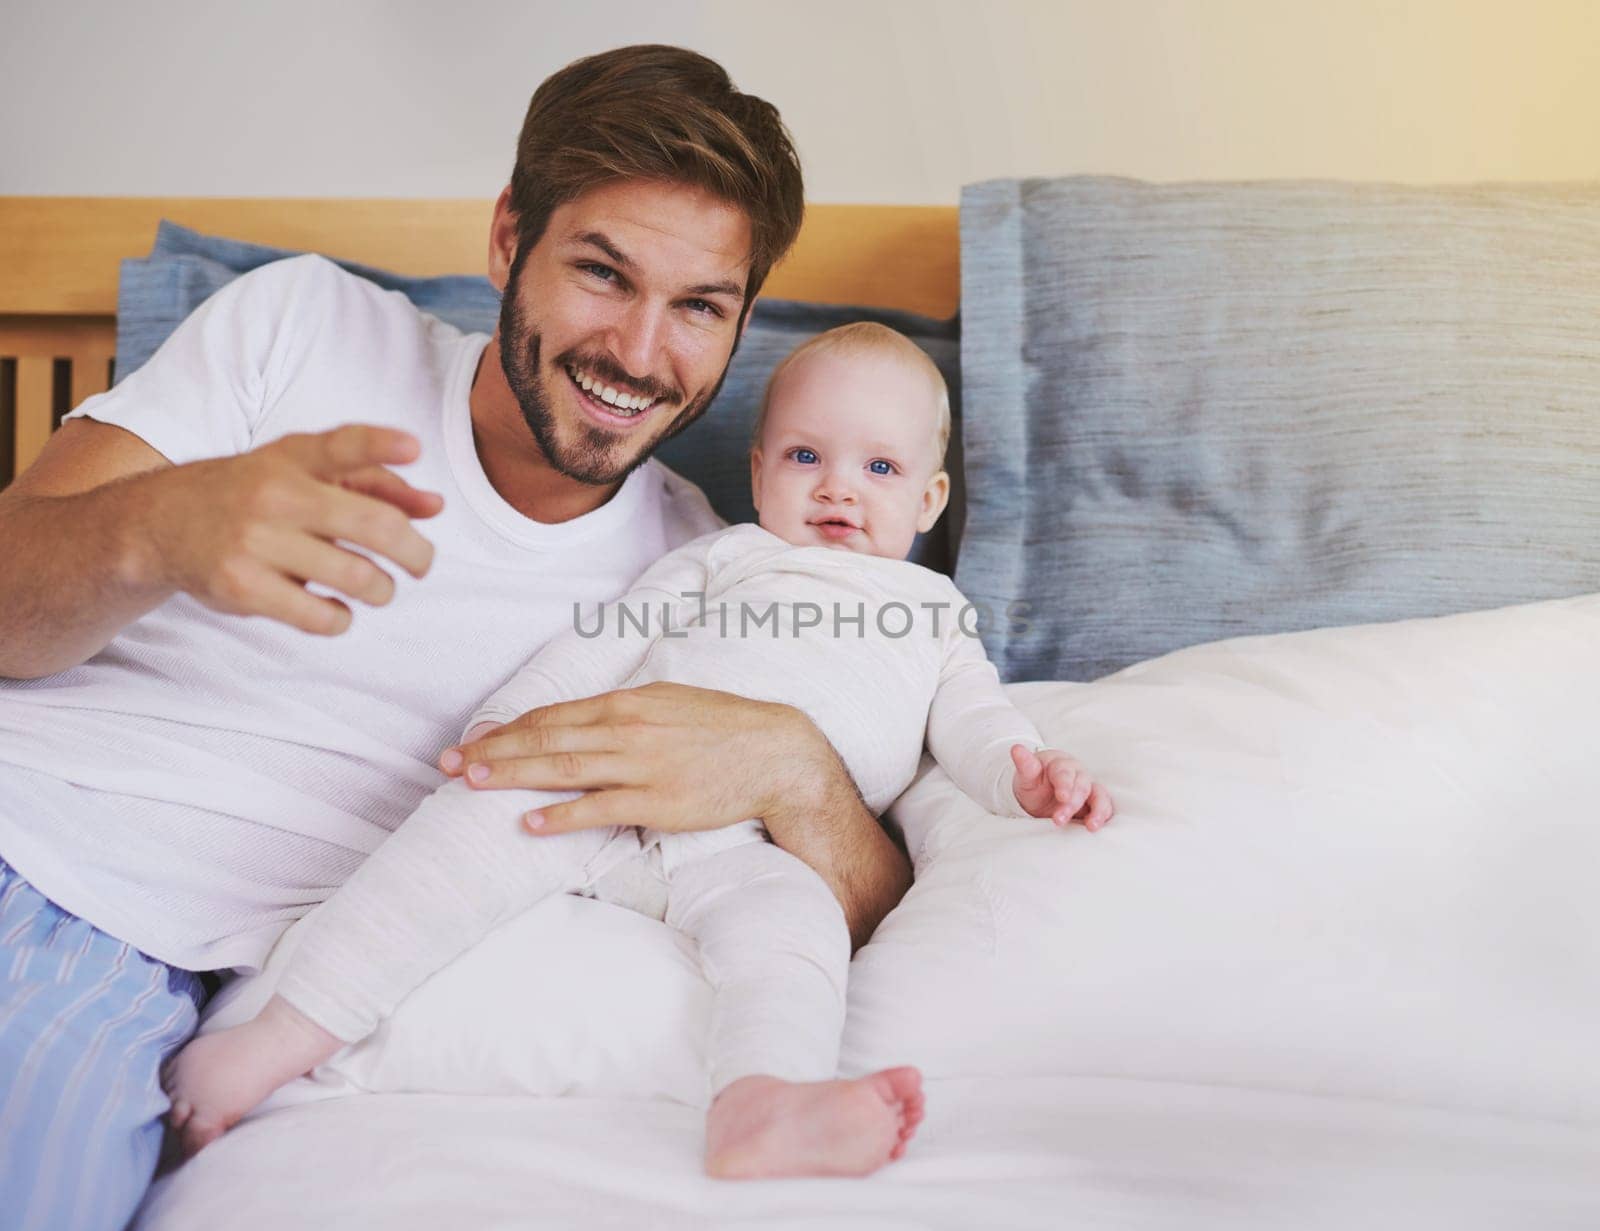 Family, bedroom and portrait of father with baby for bonding, relationship and love for parenting. Happy, home and dad relax with newborn infant for child development, support and care in house.